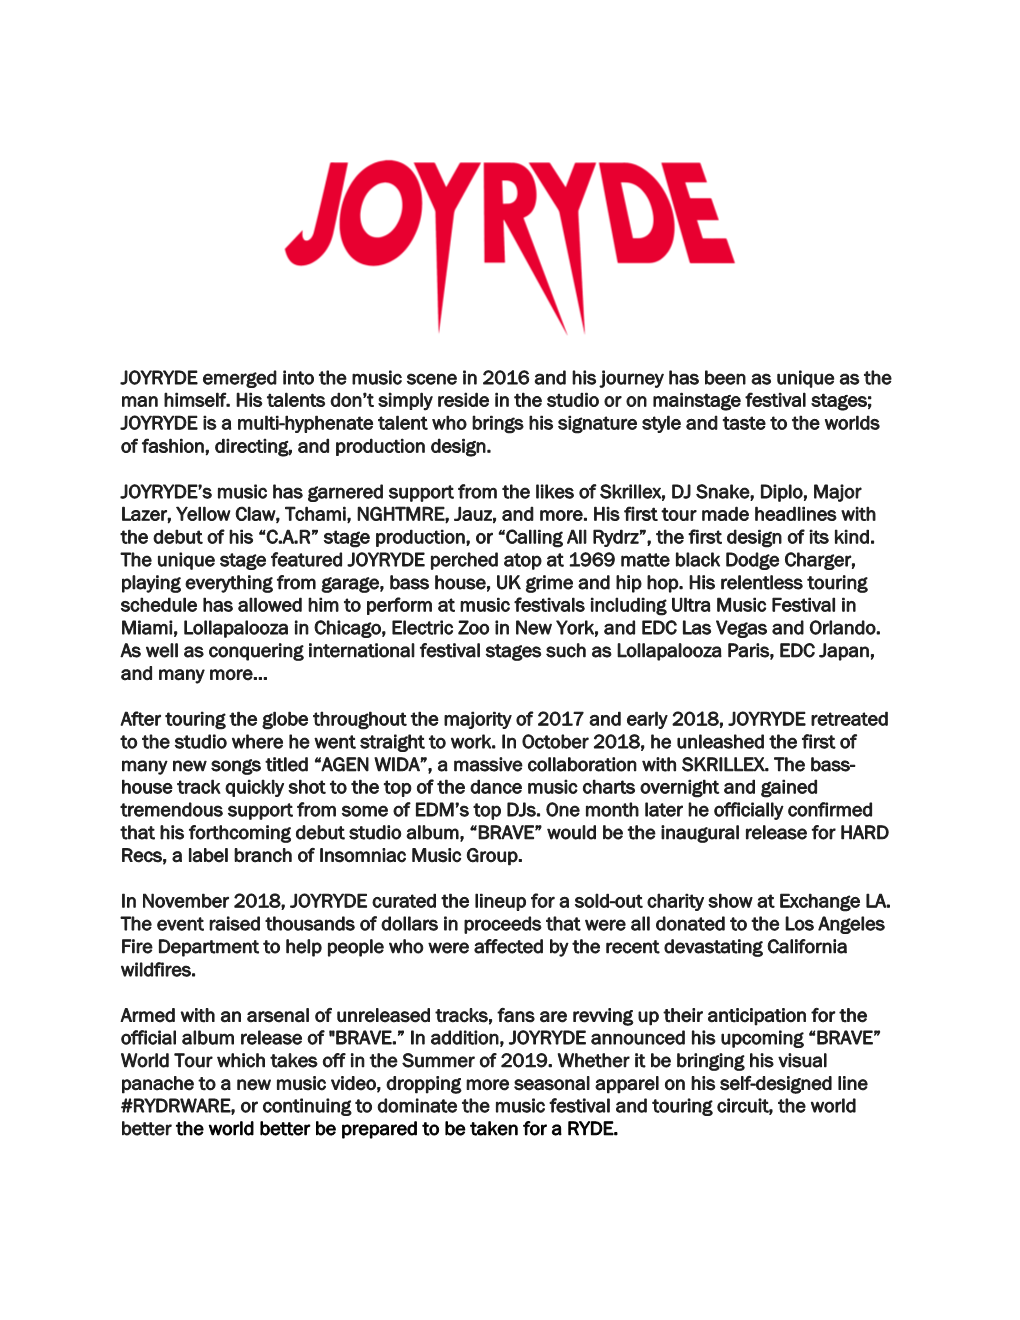 JOYRYDE Emerged Into the Music Scene in 2016 and His Journey Has Been As Unique As the Man Himself